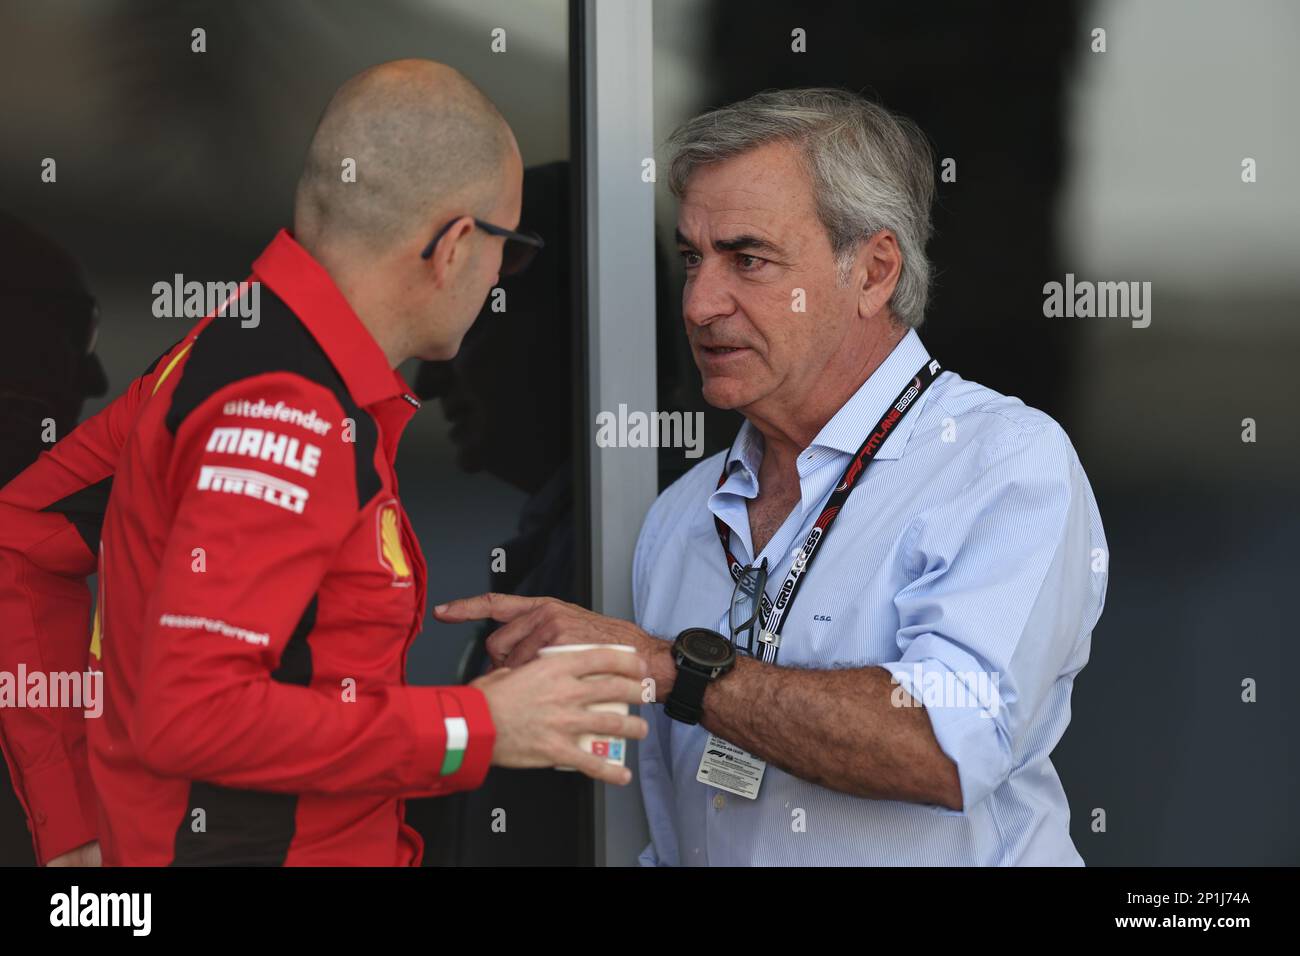 Father of carlos sainz junior hi-res stock photography and images - Alamy